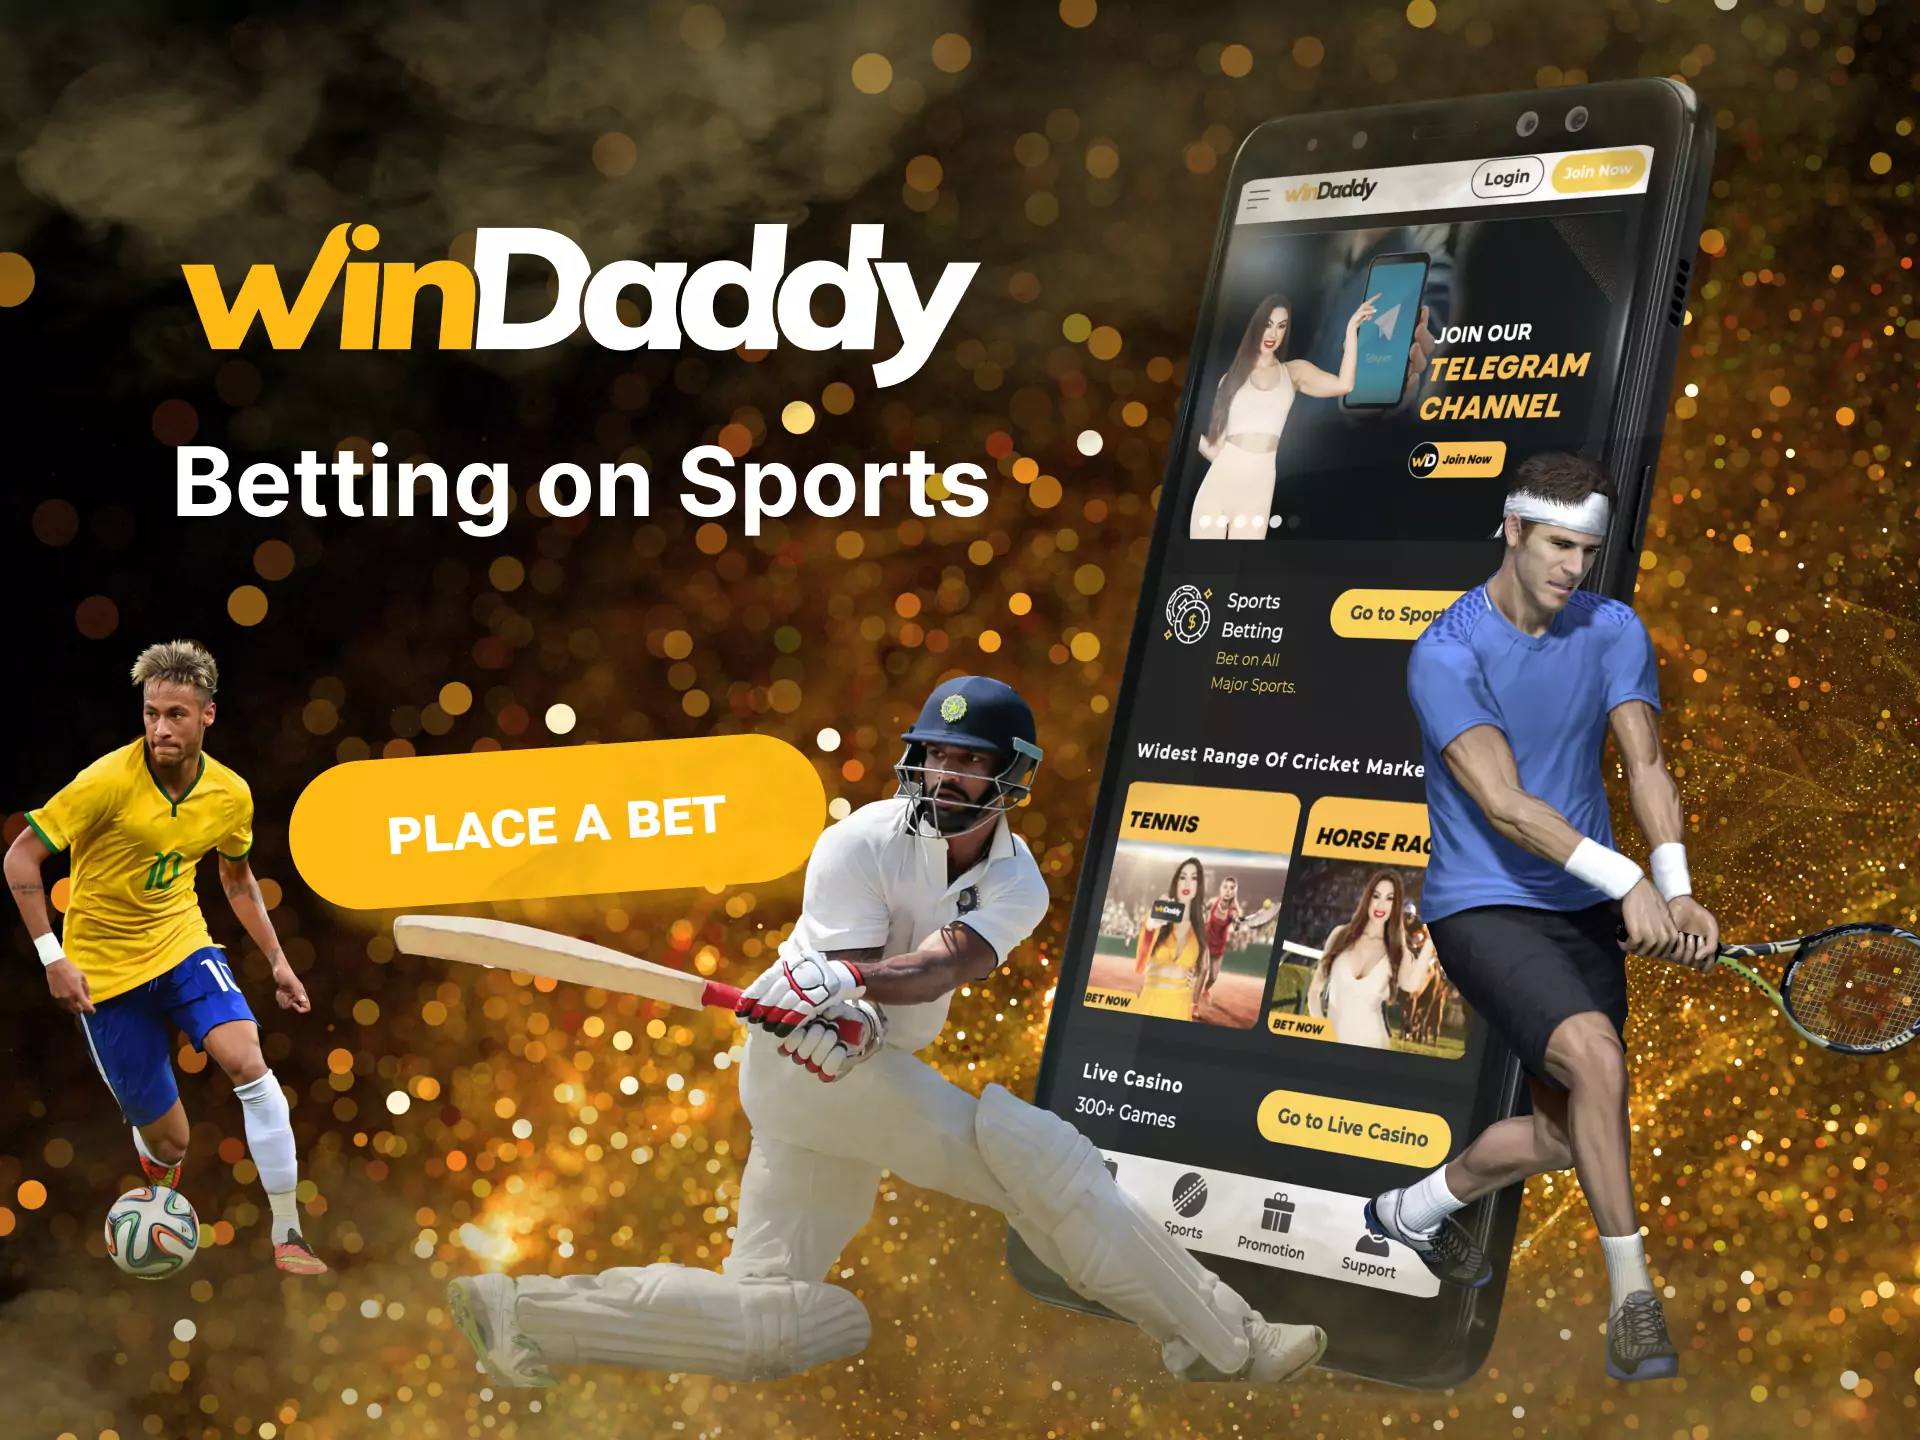 Bet on all important sports matches live in Windaddy.